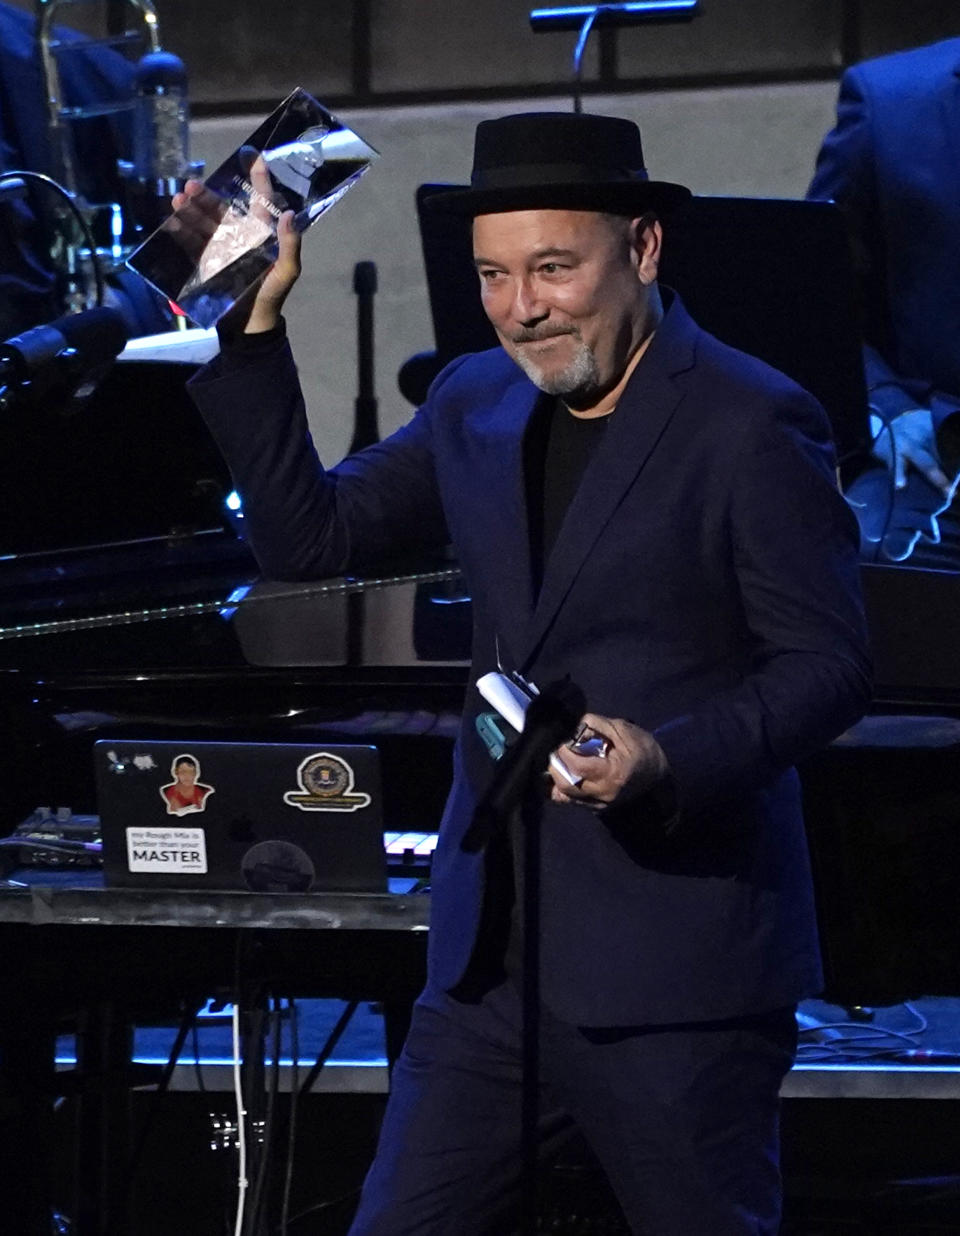 Ruben Blades accepts the person of the year award at the Latin Recording Academy Person of the Year gala in his honor at the Mandalay Bay on Wednesday, Nov. 17, 2021, in Las Vegas. (AP Photo/Chris Pizzello)